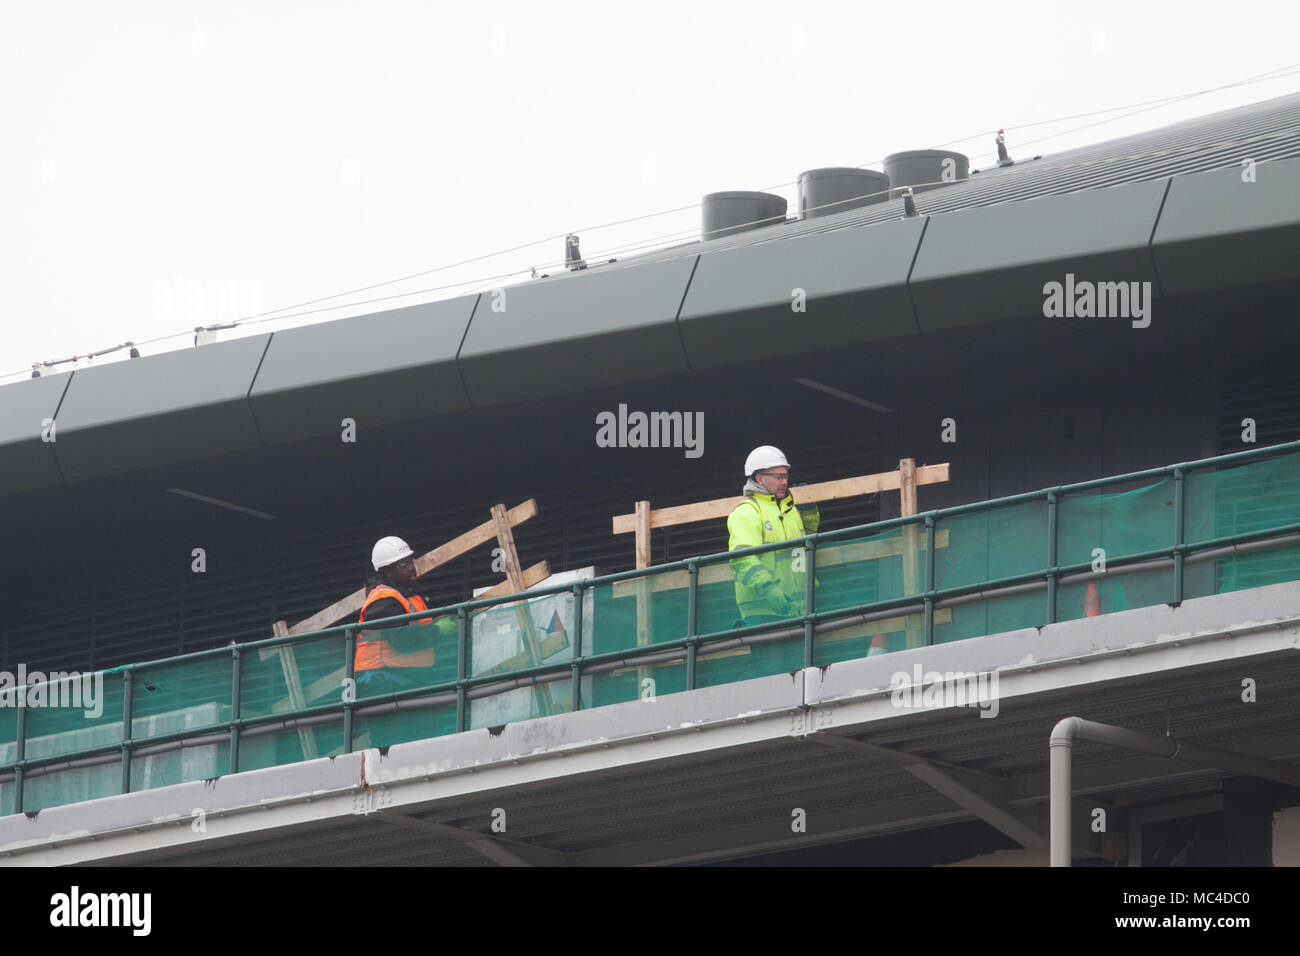 London, UK. 13 April 2018. Workers prepare to install the retractable roof over Court One at  the All England Tennis Club which will be ready for the 2019 Wimbledon tennis championships and which will increase seating capacity and transform the grass court arena capable of guaranteeing  play in all weather conditions. Credit: amer ghazzal/Alamy Live News Stock Photo